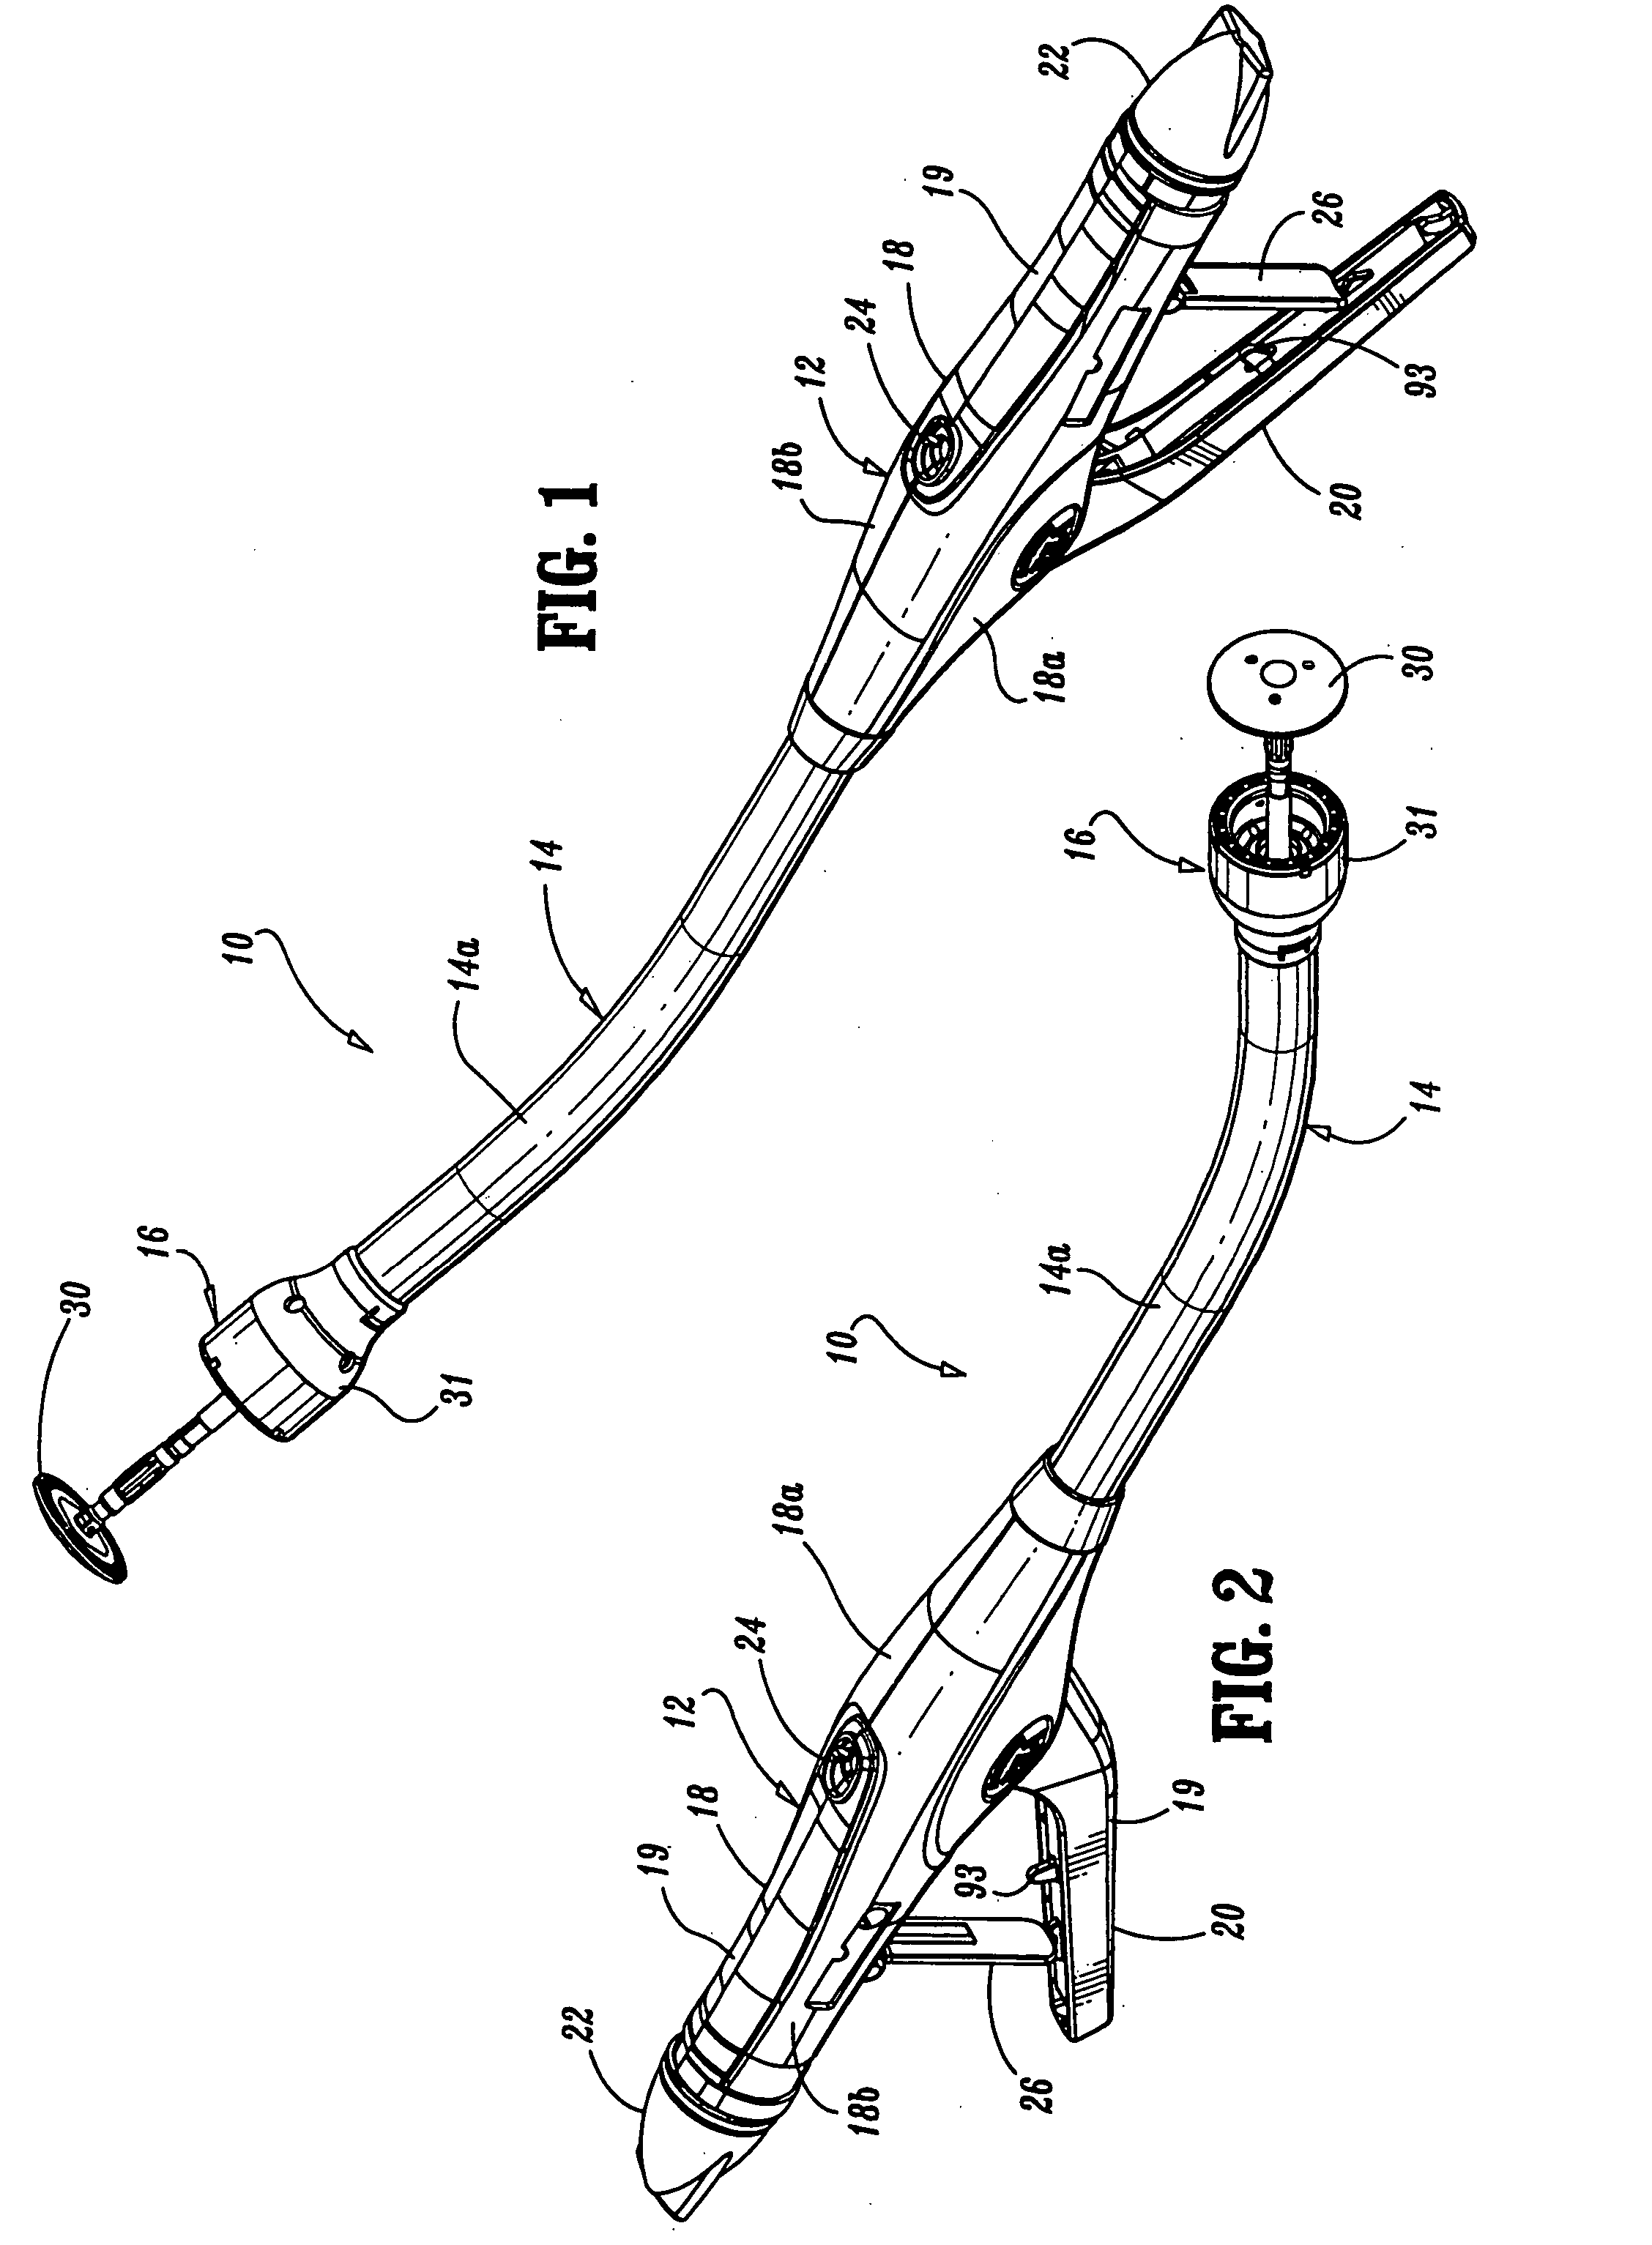 Surgical Stapling Device for Performing Circular Anastomoses